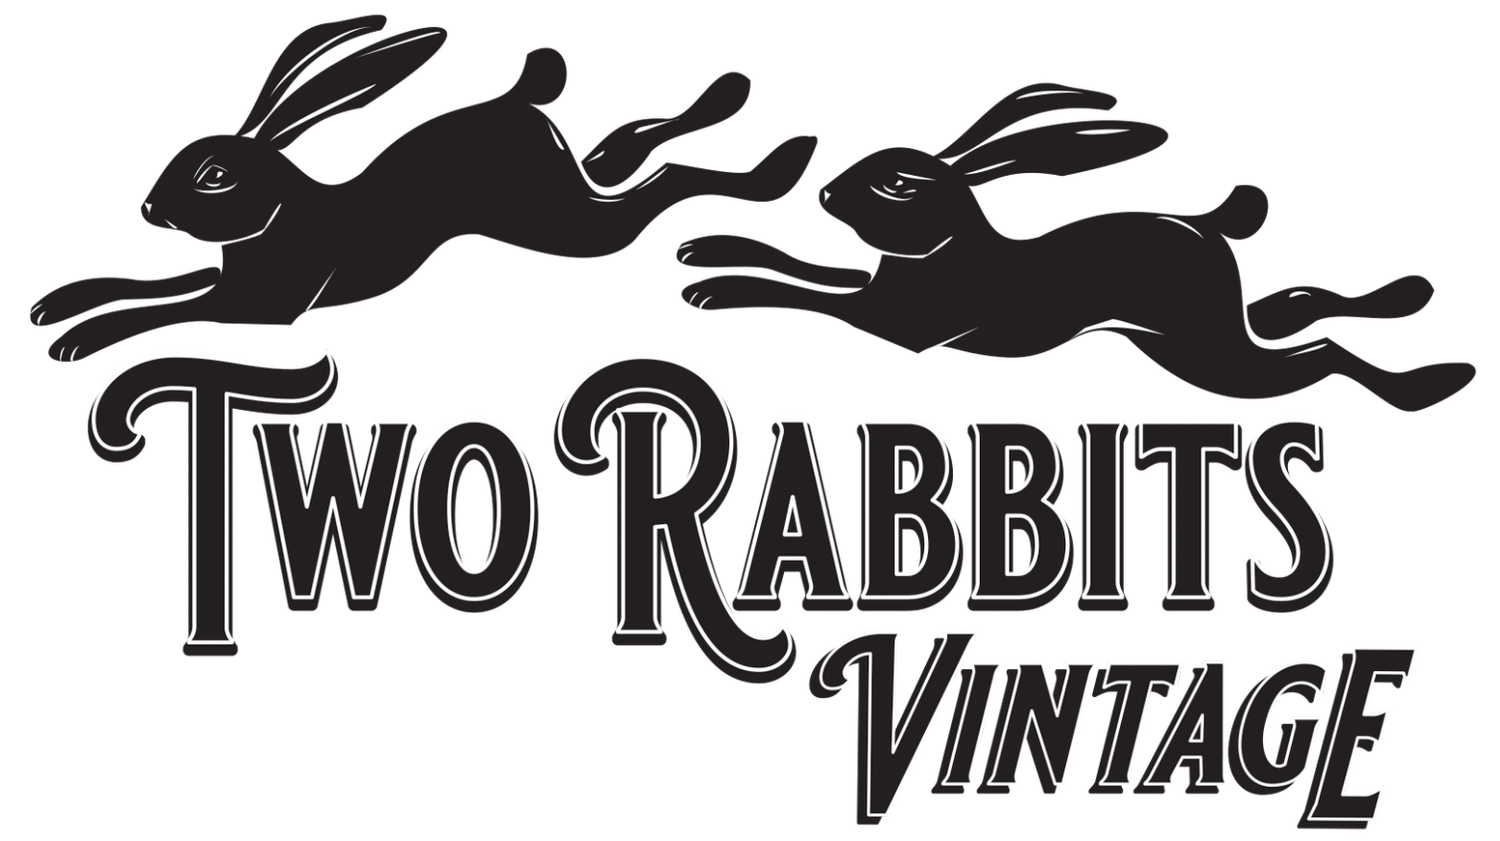 Two Rabbits Vintage